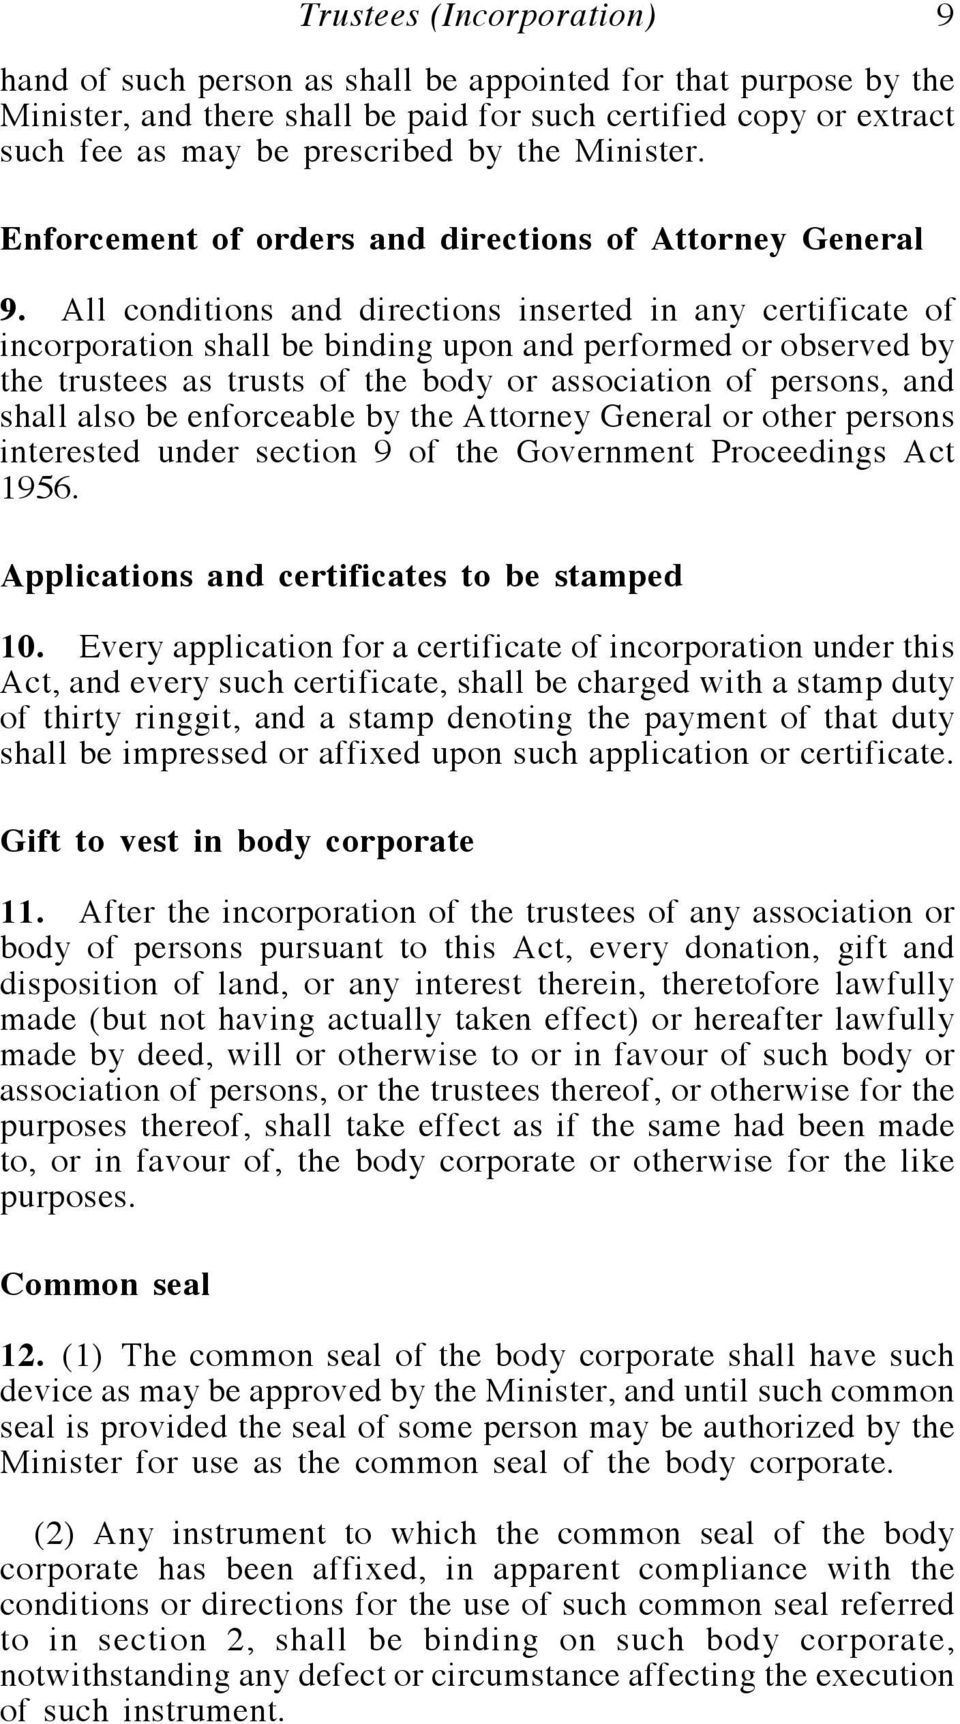 All conditions and directions inserted in any certificate of incorporation shall be binding upon and performed or observed by the trustees as trusts of the body or association of persons, and shall